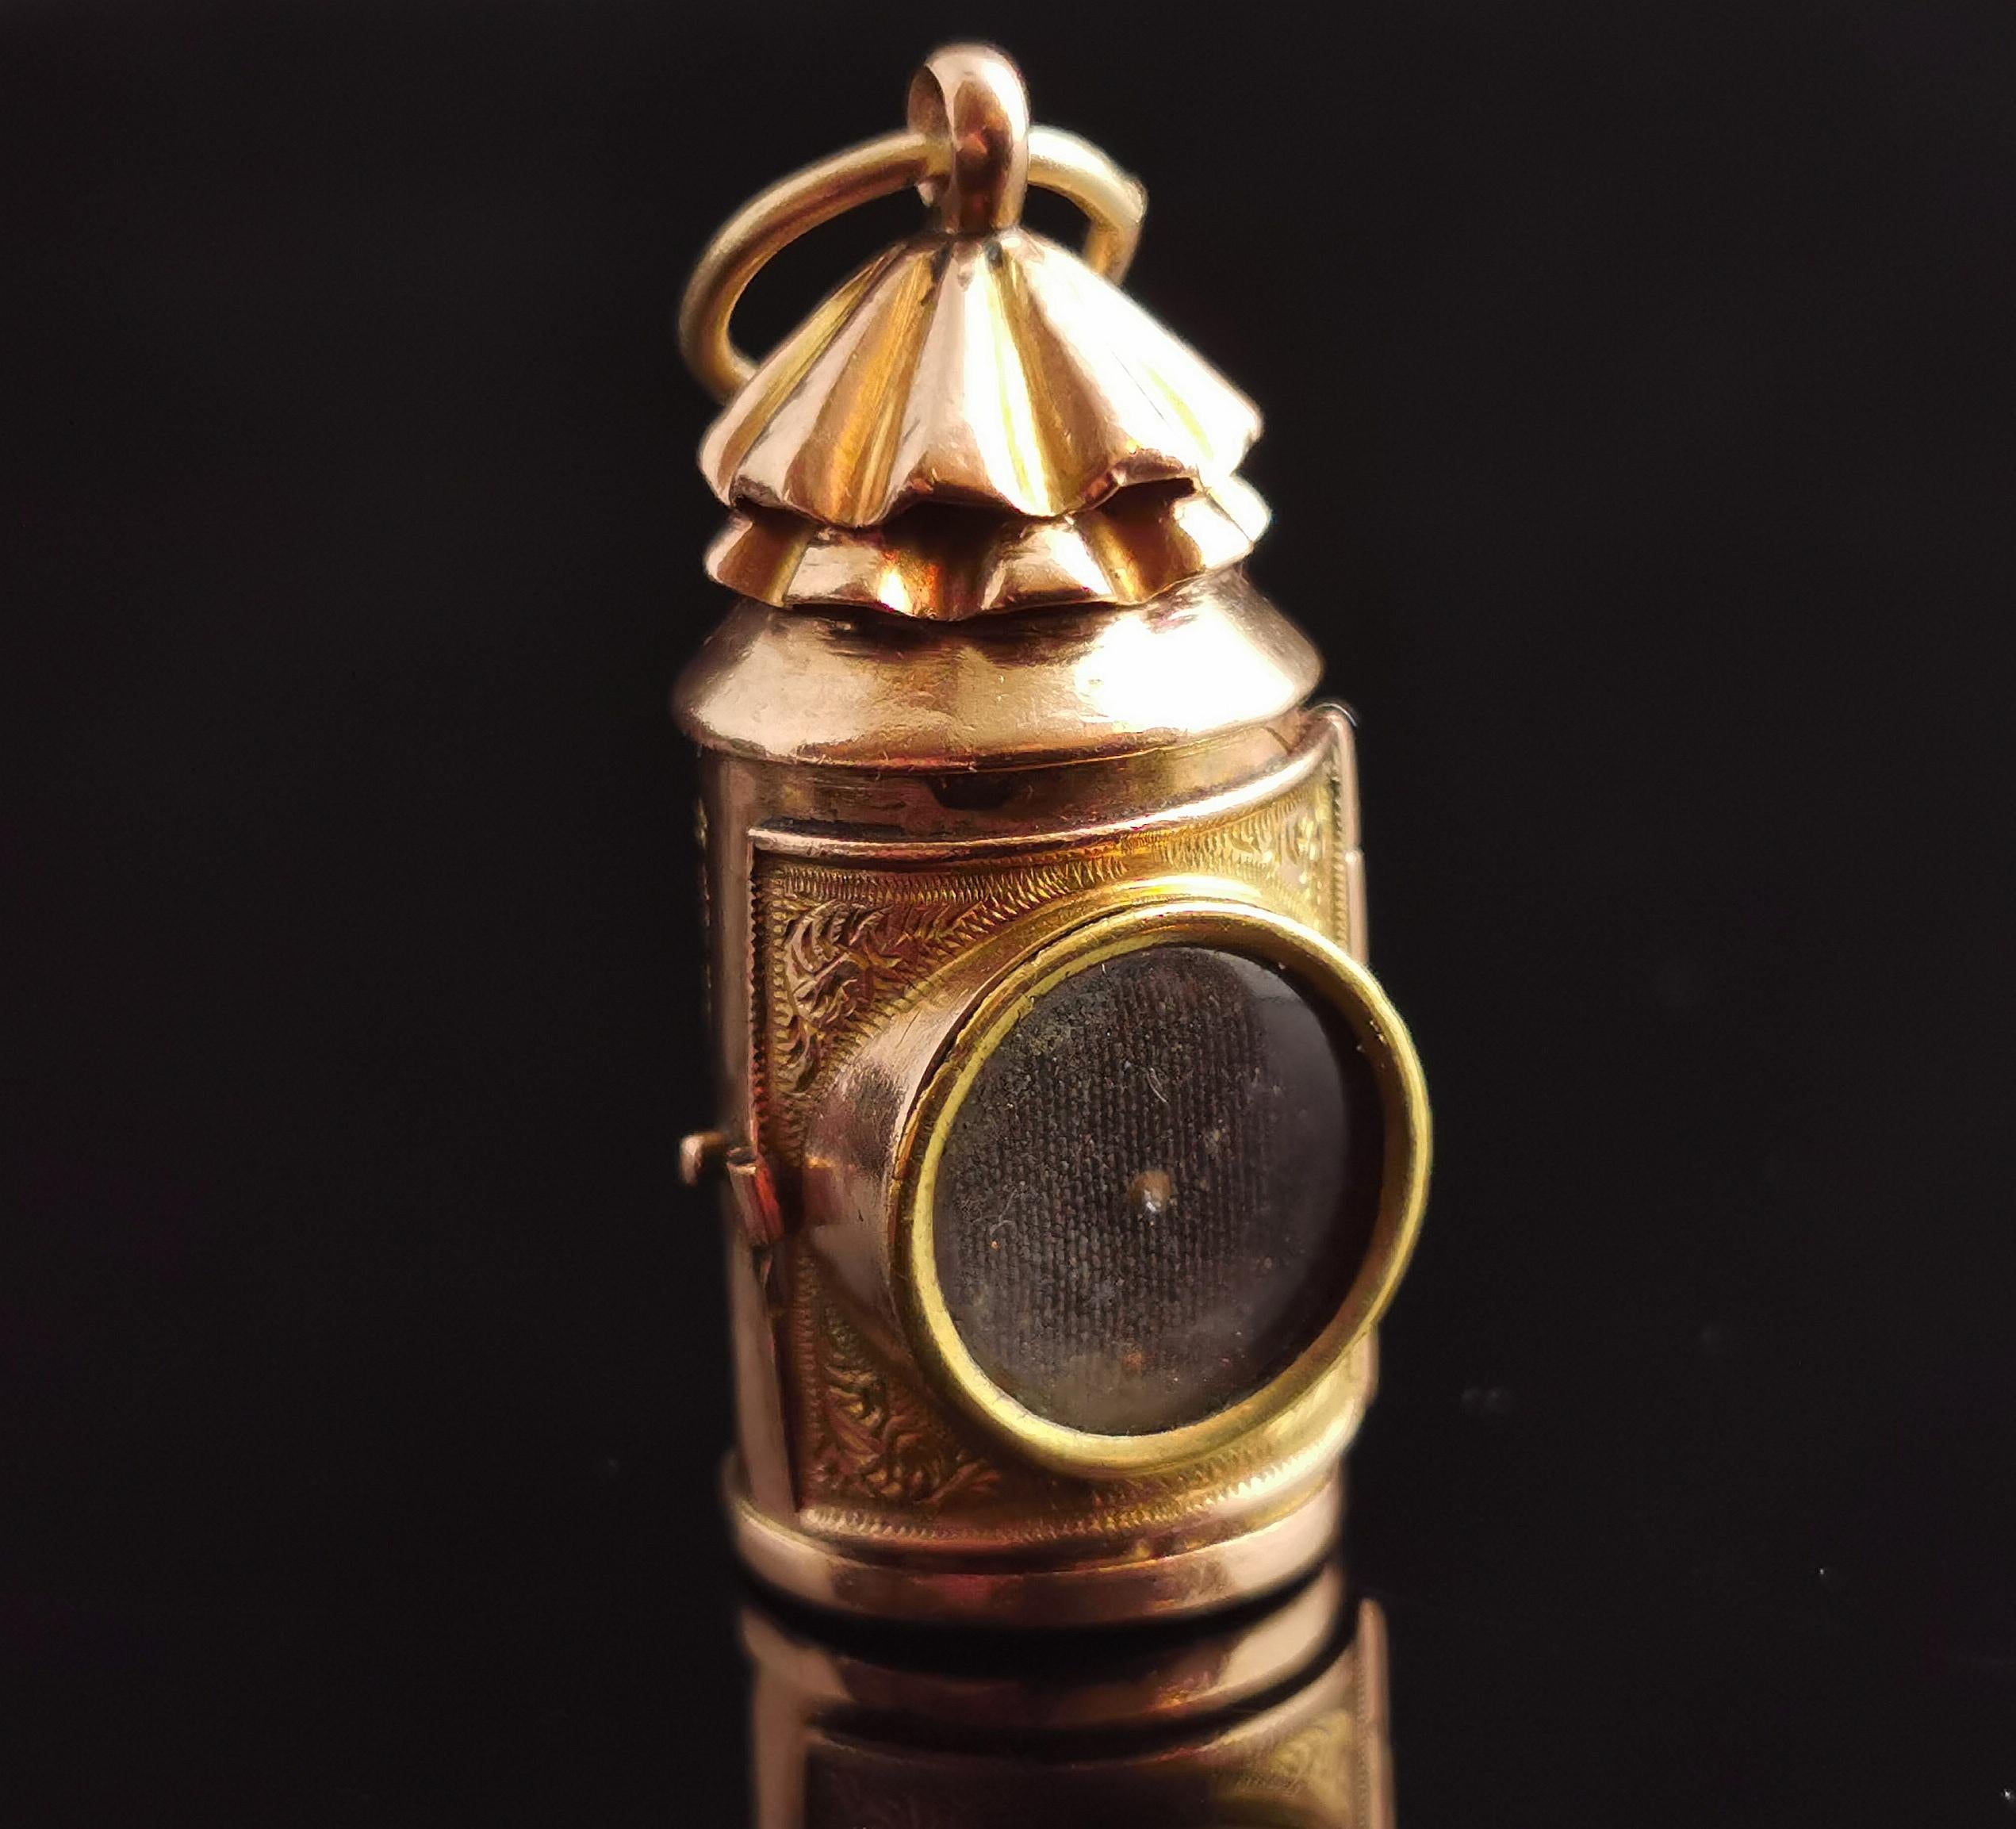 A rare and interesting novelty Victorian gold pendant.

It is carefully and well designed as a little railway lantern in 9kt yellow gold with old rosey tones.

The lantern has super realistic features that it looks as though it really opens up but